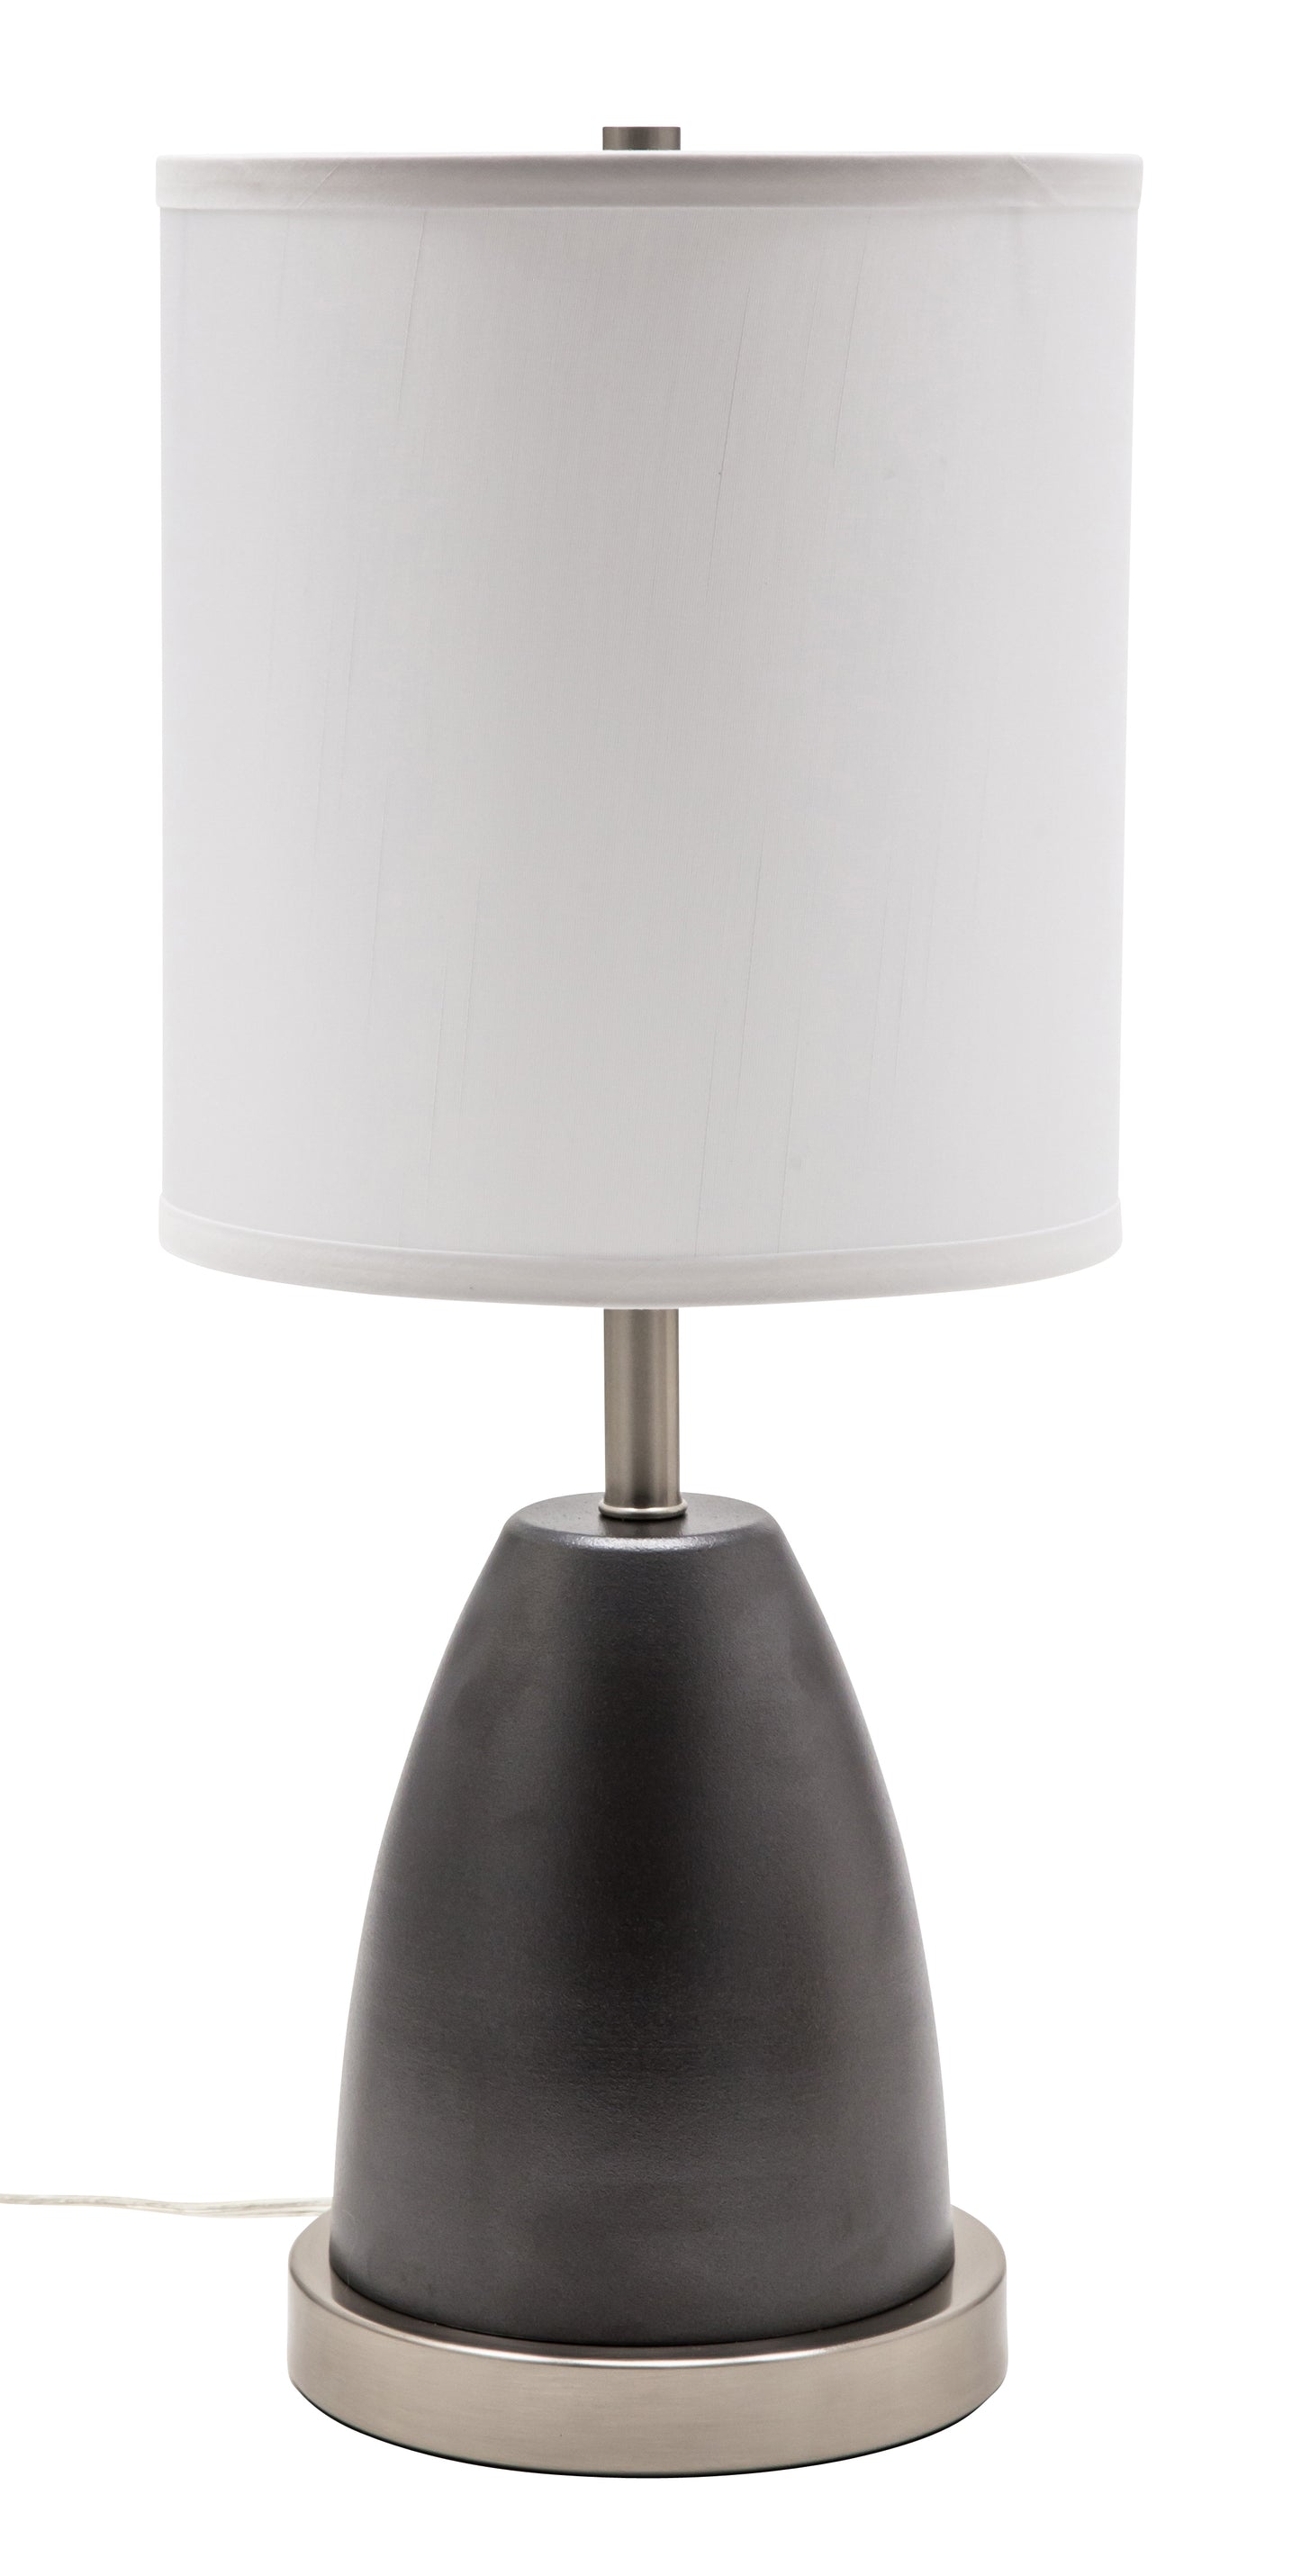 House of Troy Rupert Table Lamp Granite Satin Nickel Accents USB Port RU751-GT